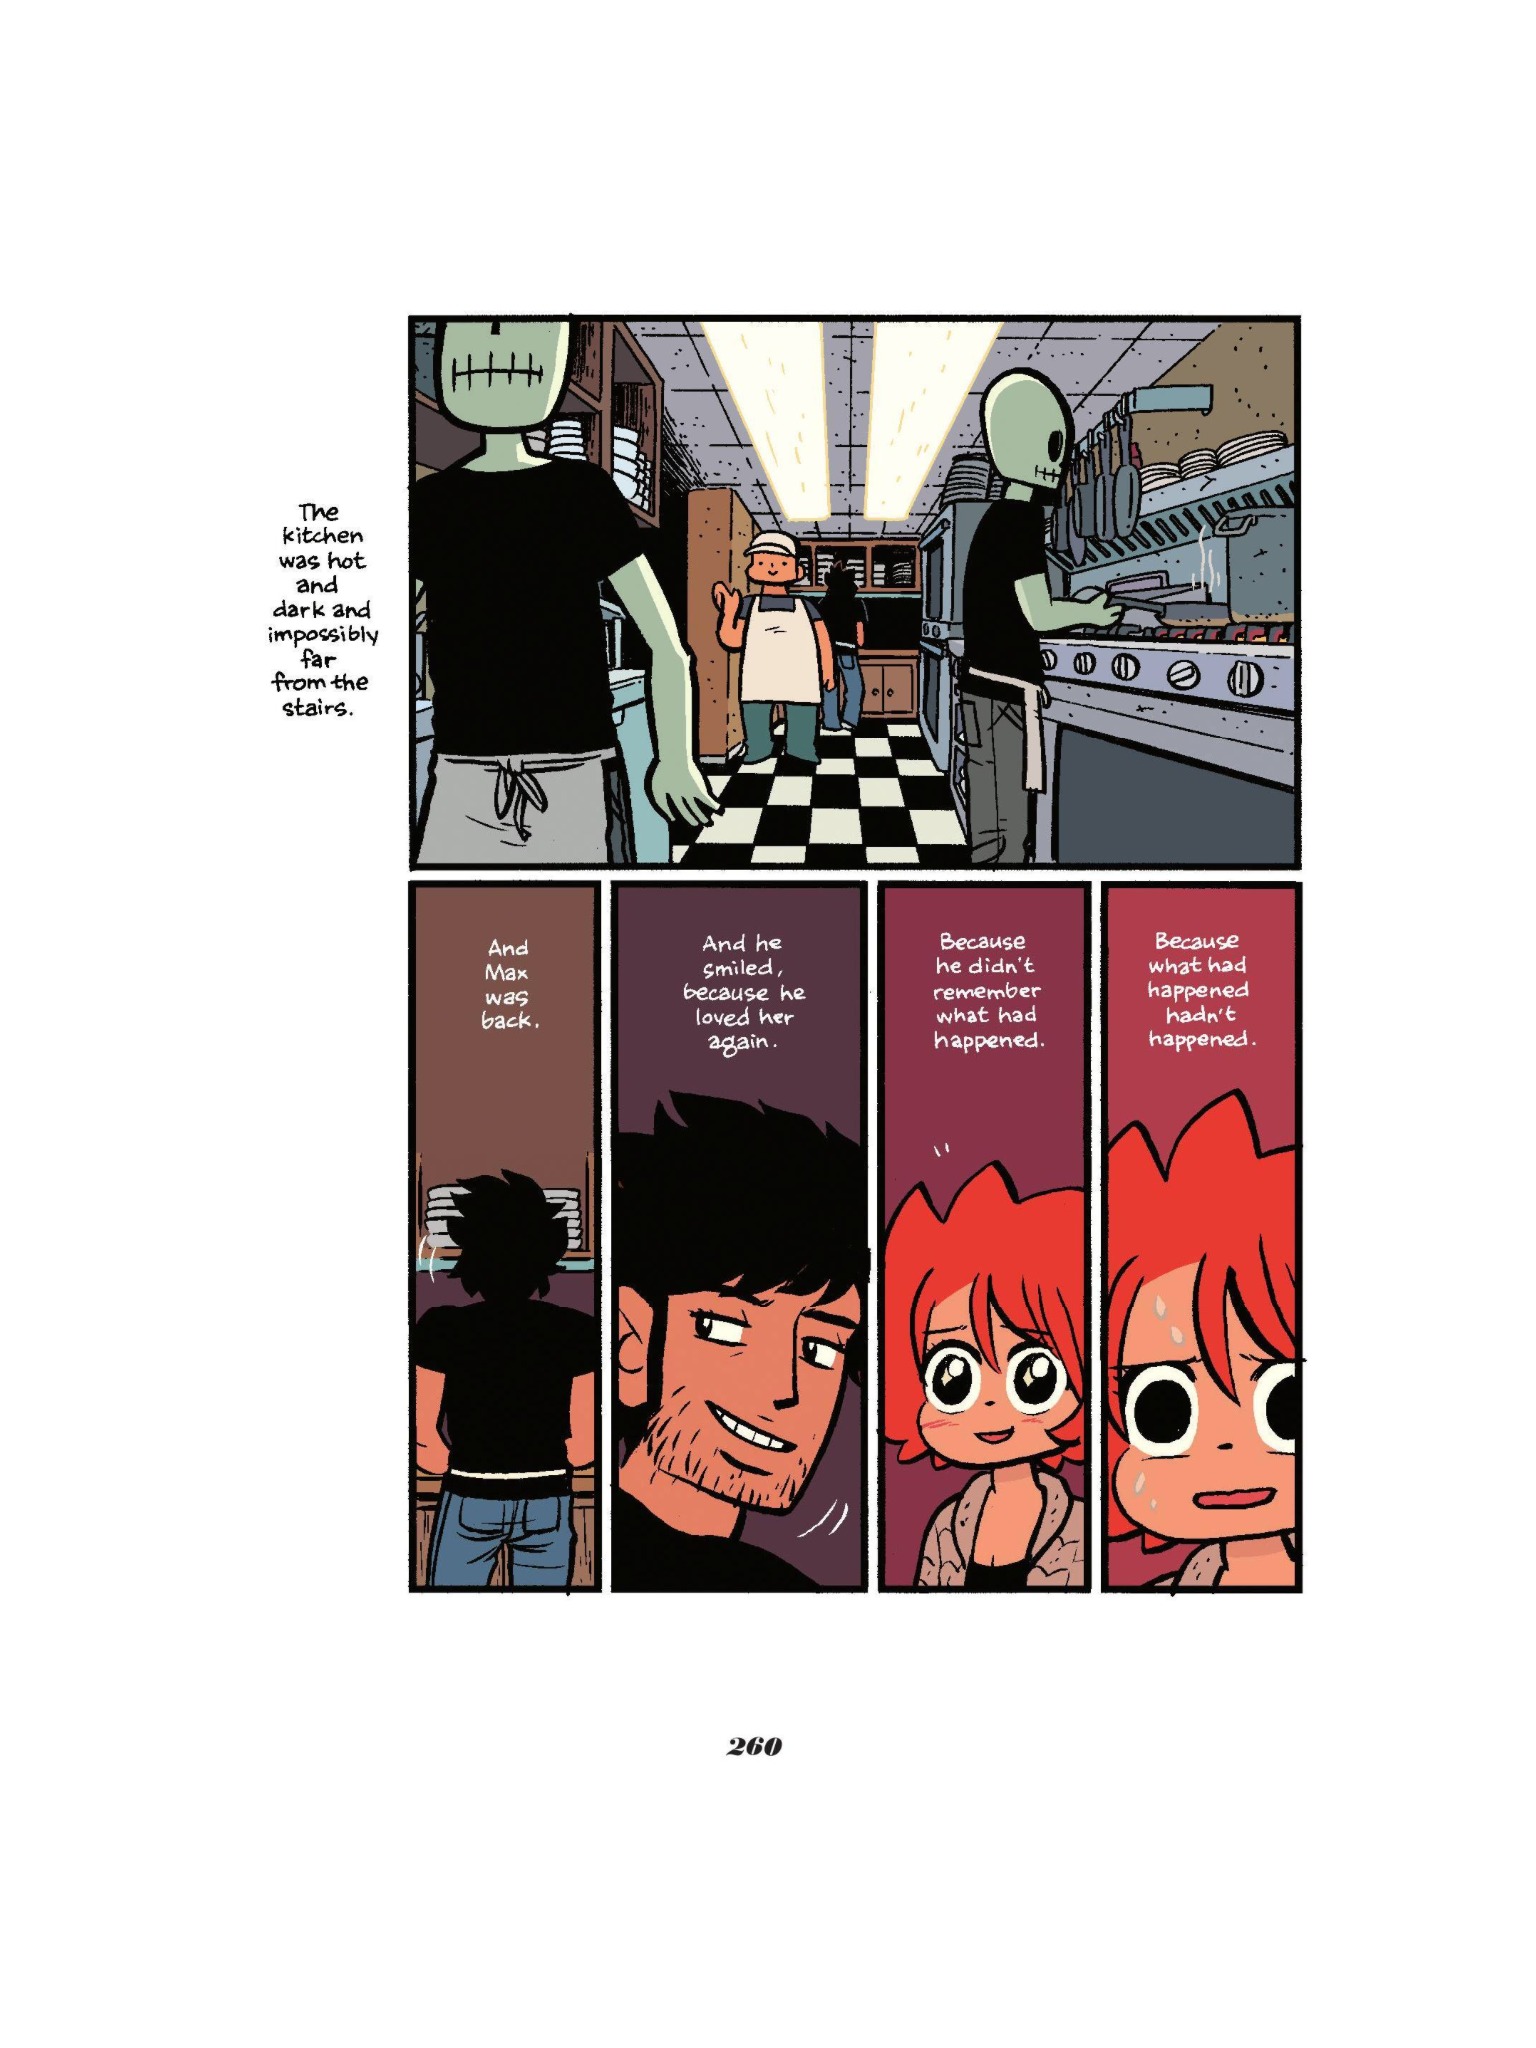 Read online Seconds comic -  Issue # Full - 260